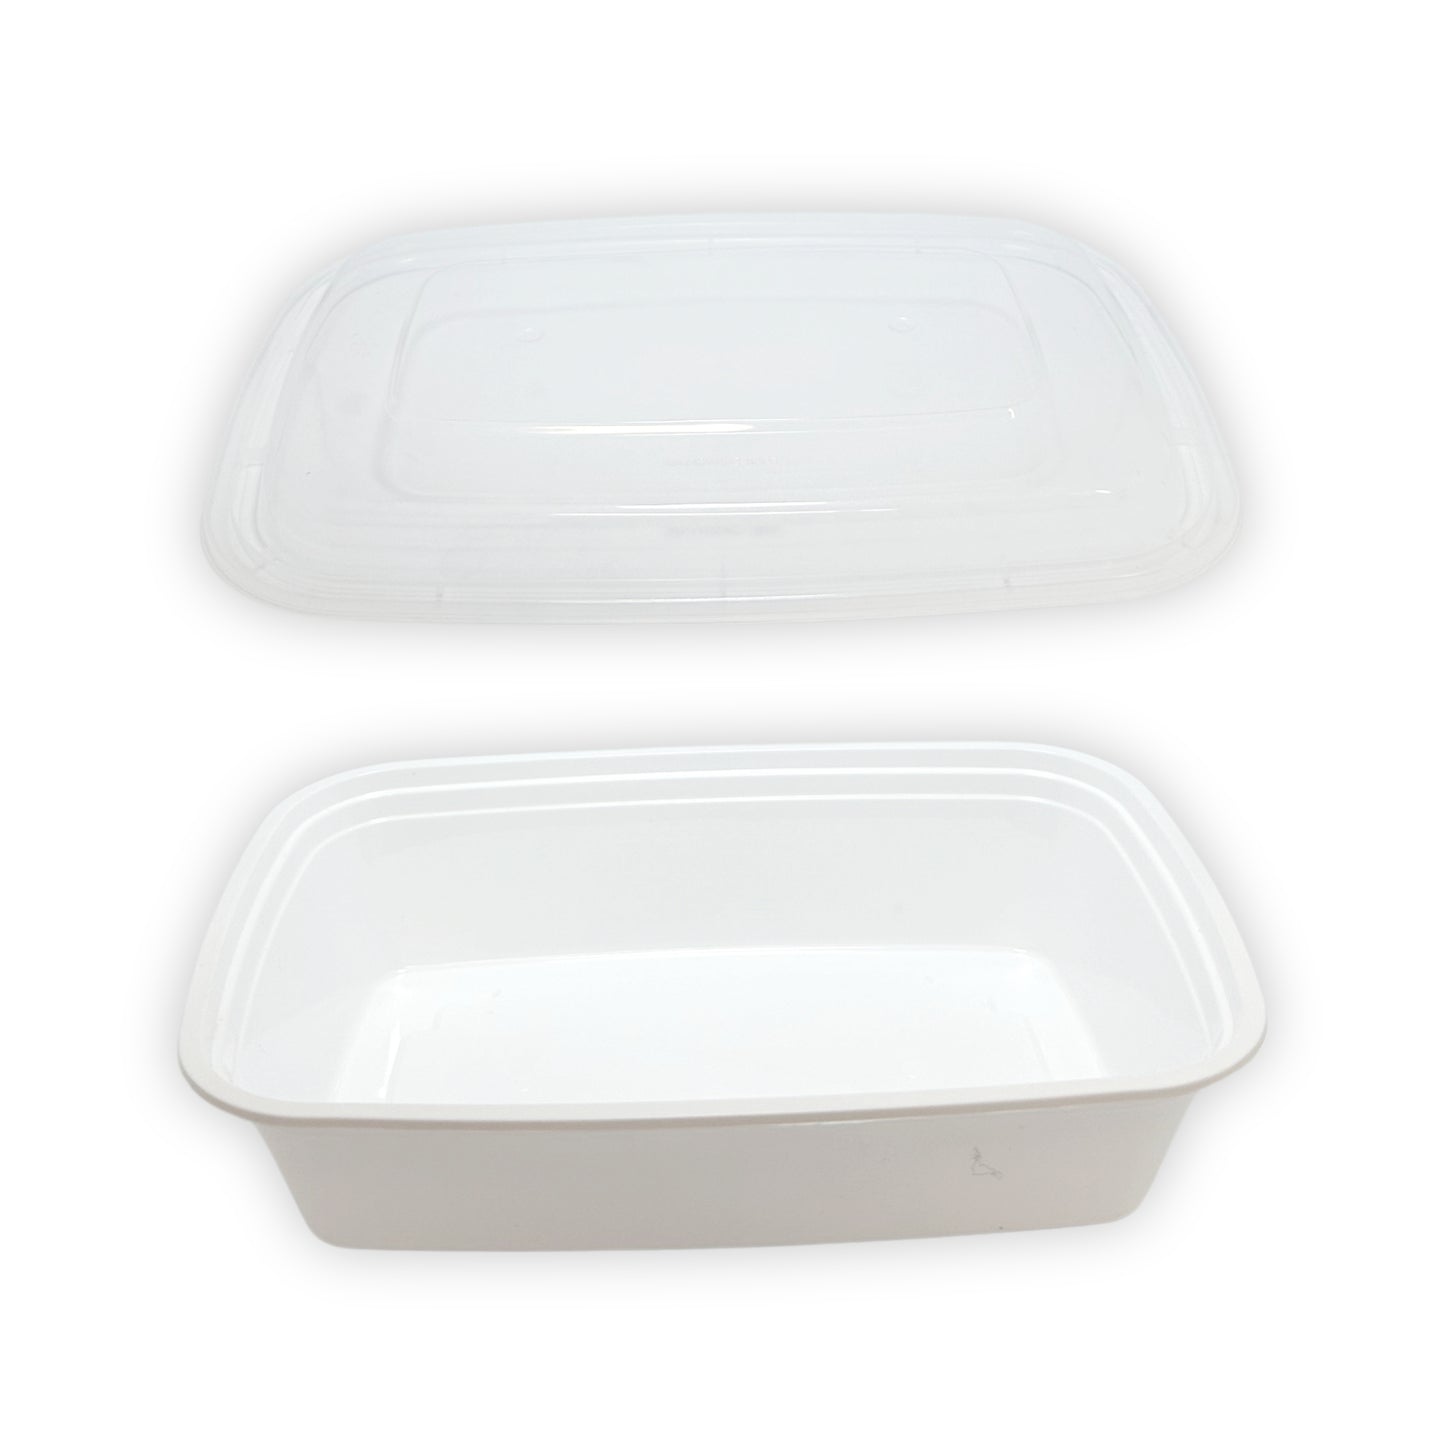 KIS-KY24G | 150sets 24oz, 710ml White PP Rectangle Container with Clear Lids Combo; $0.209/set